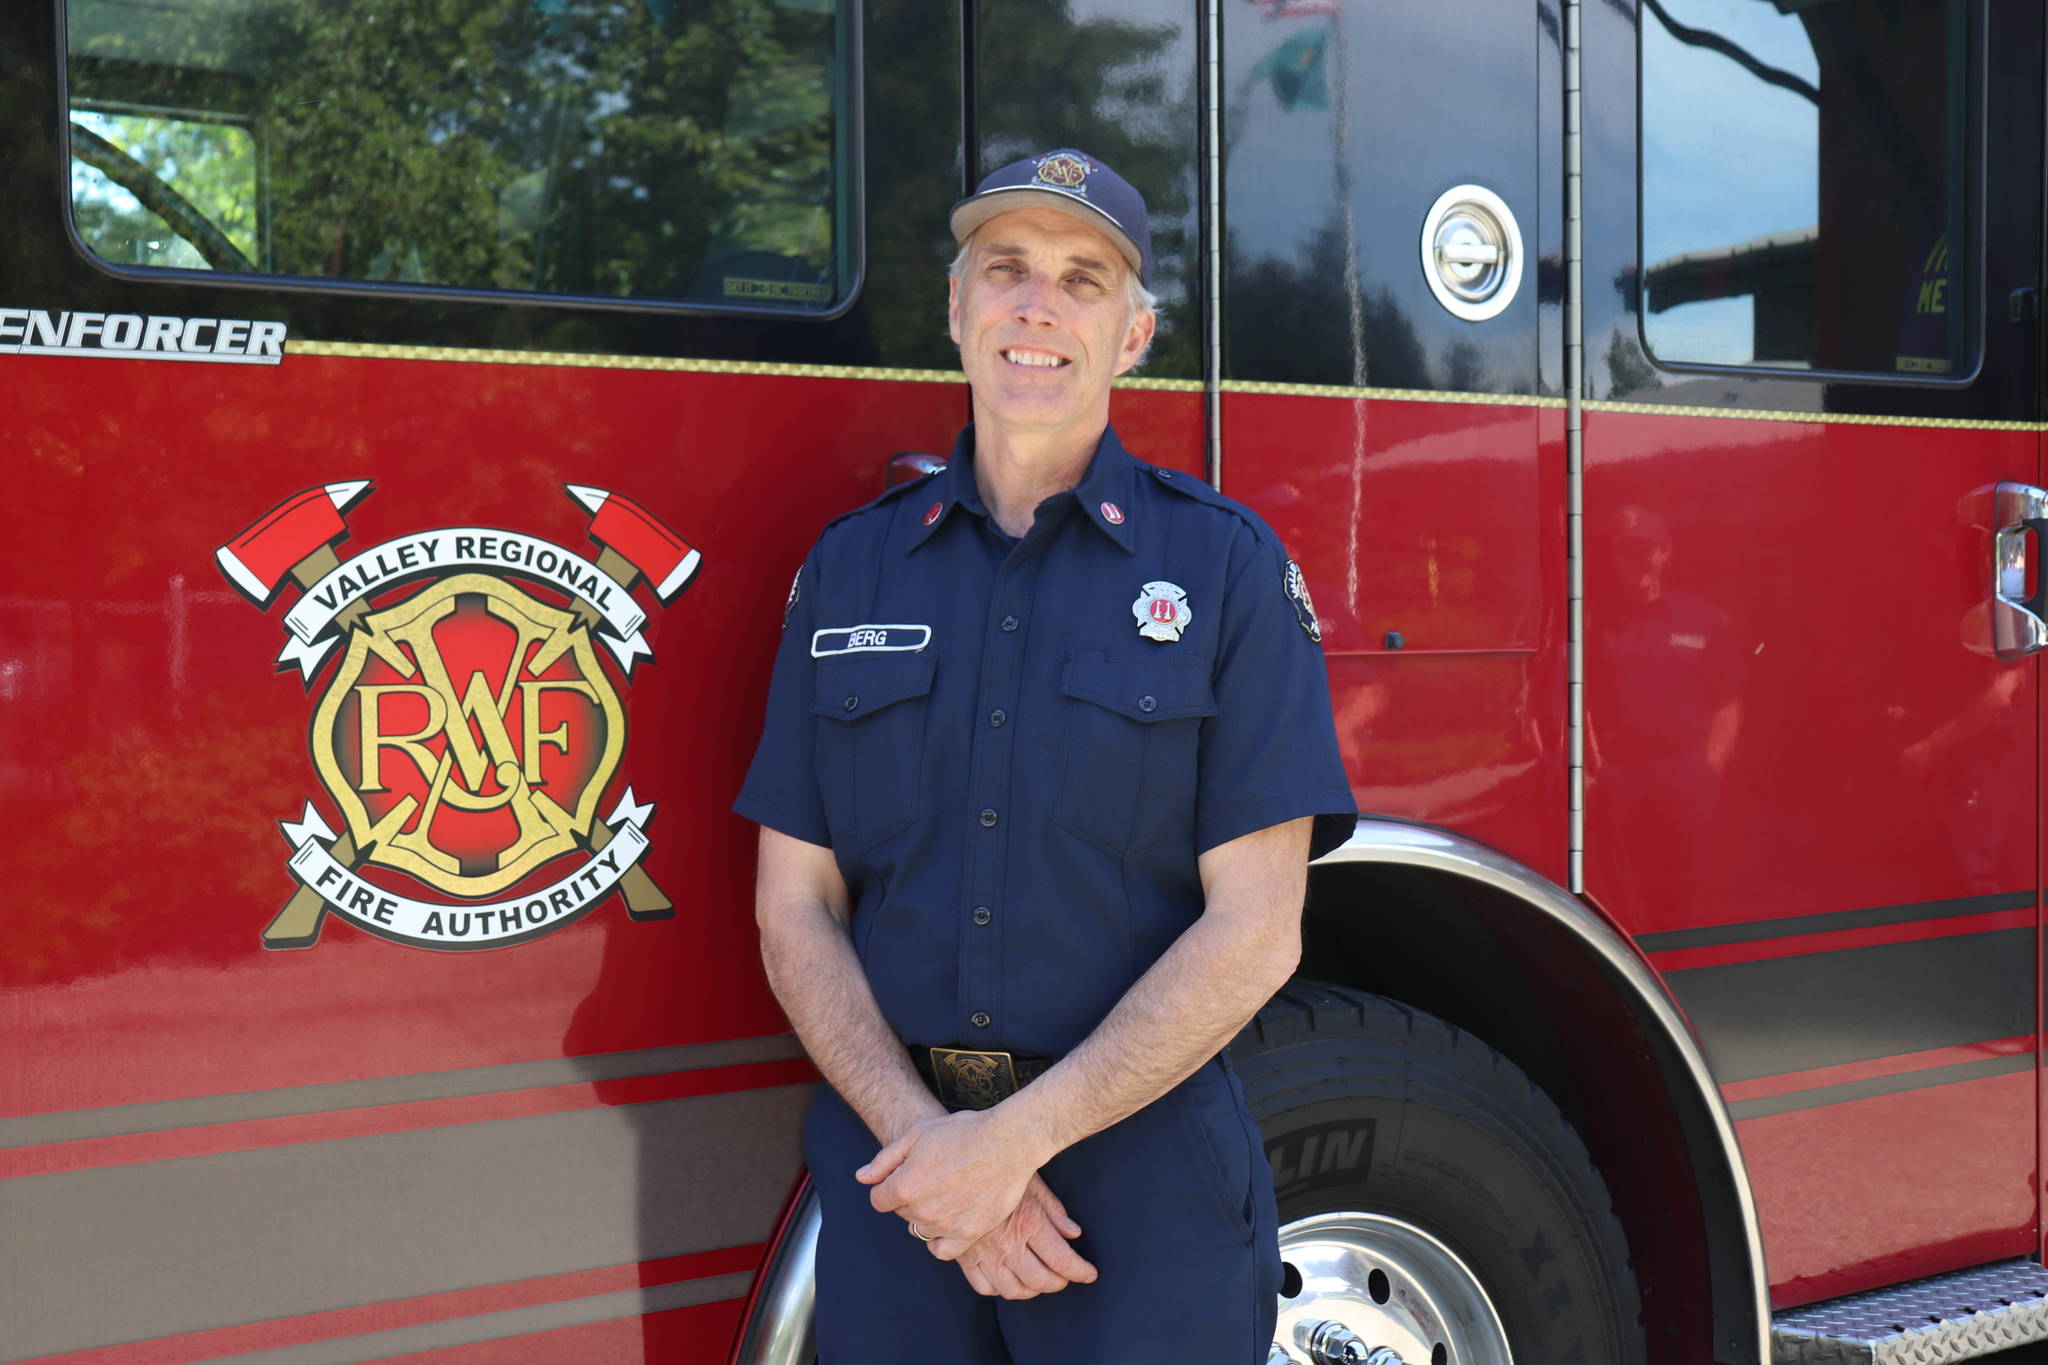 VRFA Fire Captain retires this month after 32 years with the fire service. Courtesy of VRFA